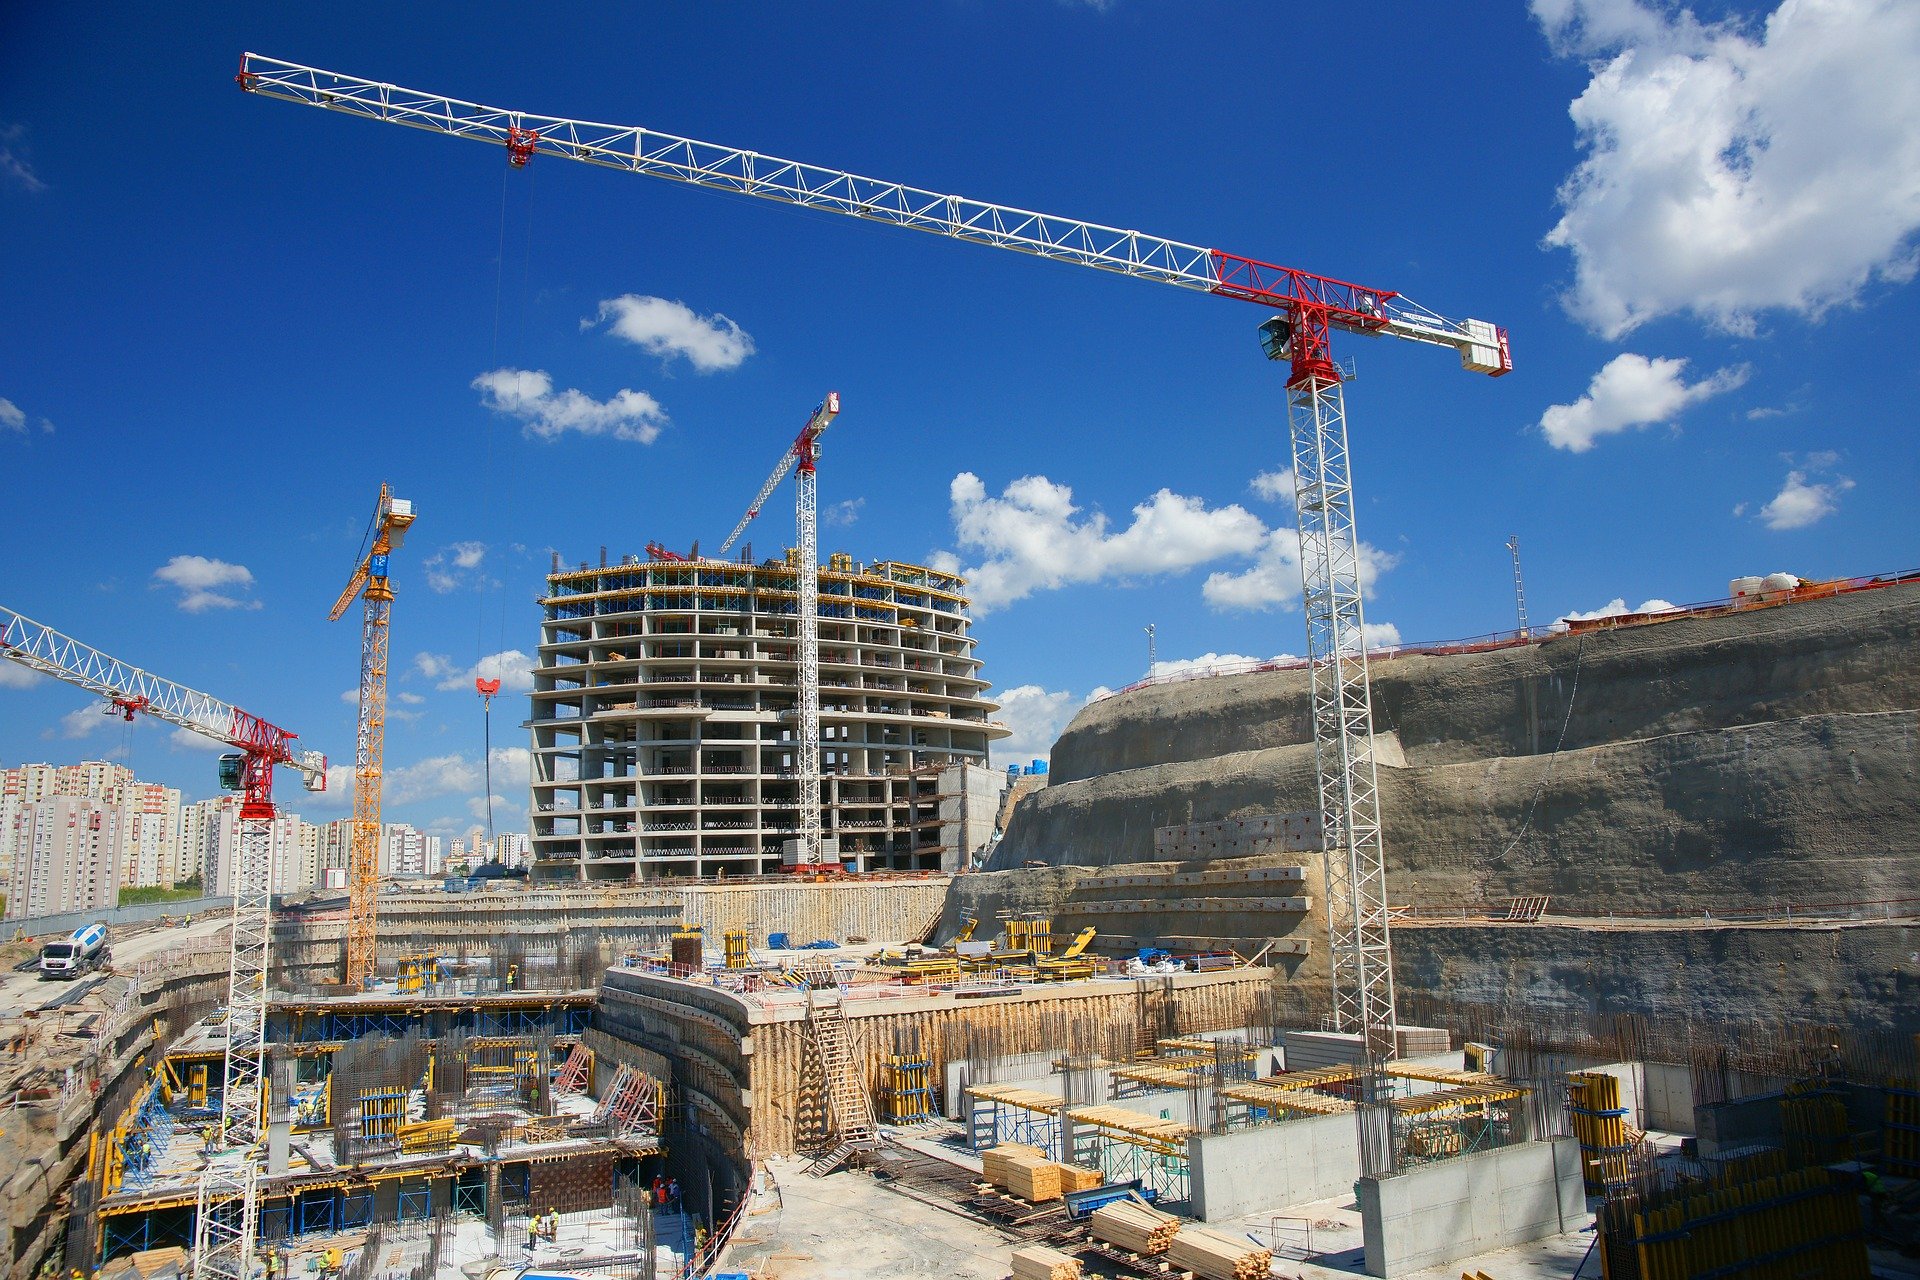 Top five multi-family housing construction projects that commenced in Canada in Q3 2021